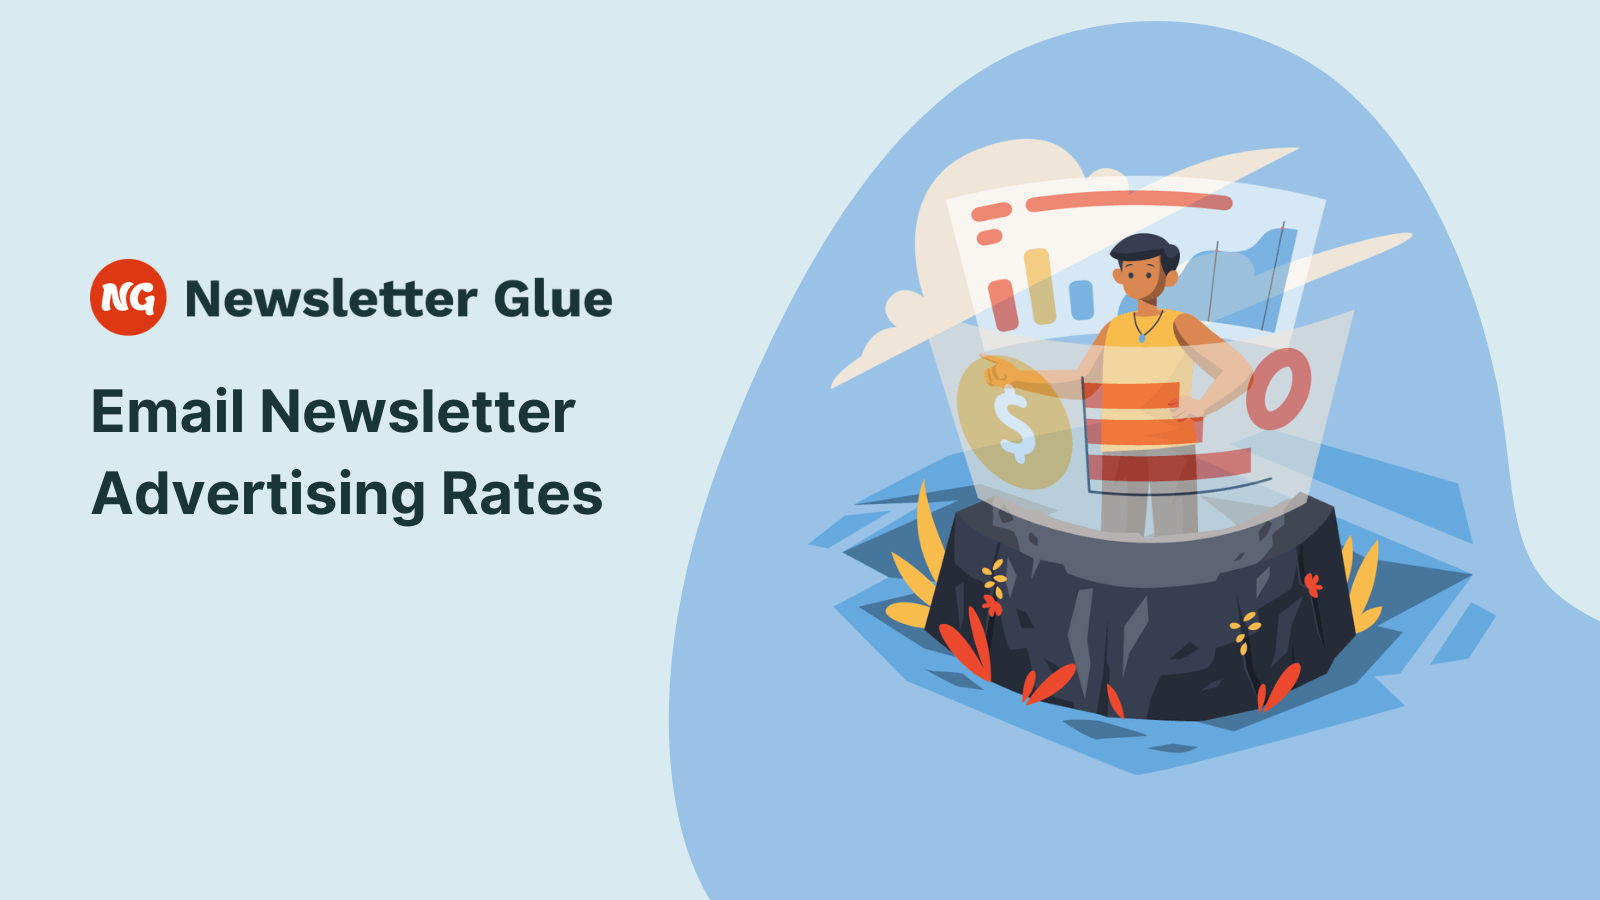 Email Newsletter Advertising Rates